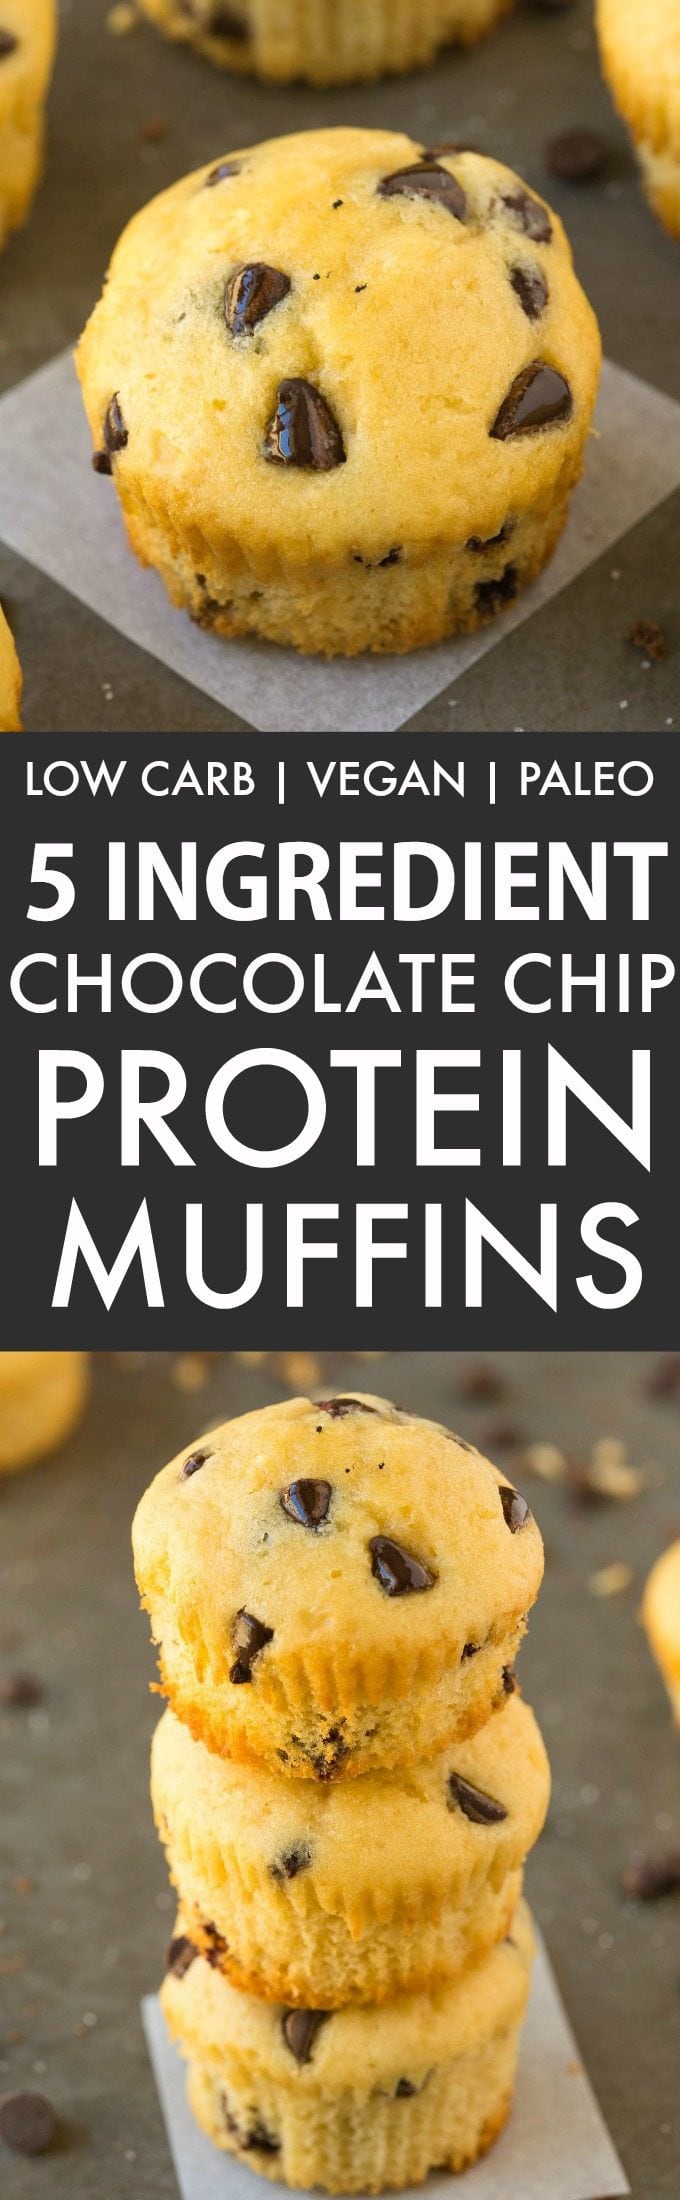 5 Ingredient Chocolate Chip Protein Muffins (GF, V, Paleo)- Healthy, 5-ingredient fluffy muffins loaded with chocolate chips and 100% guilt-free and low carb! {sugar-free, vegan, gluten free recipe}- thebigmansworld.com